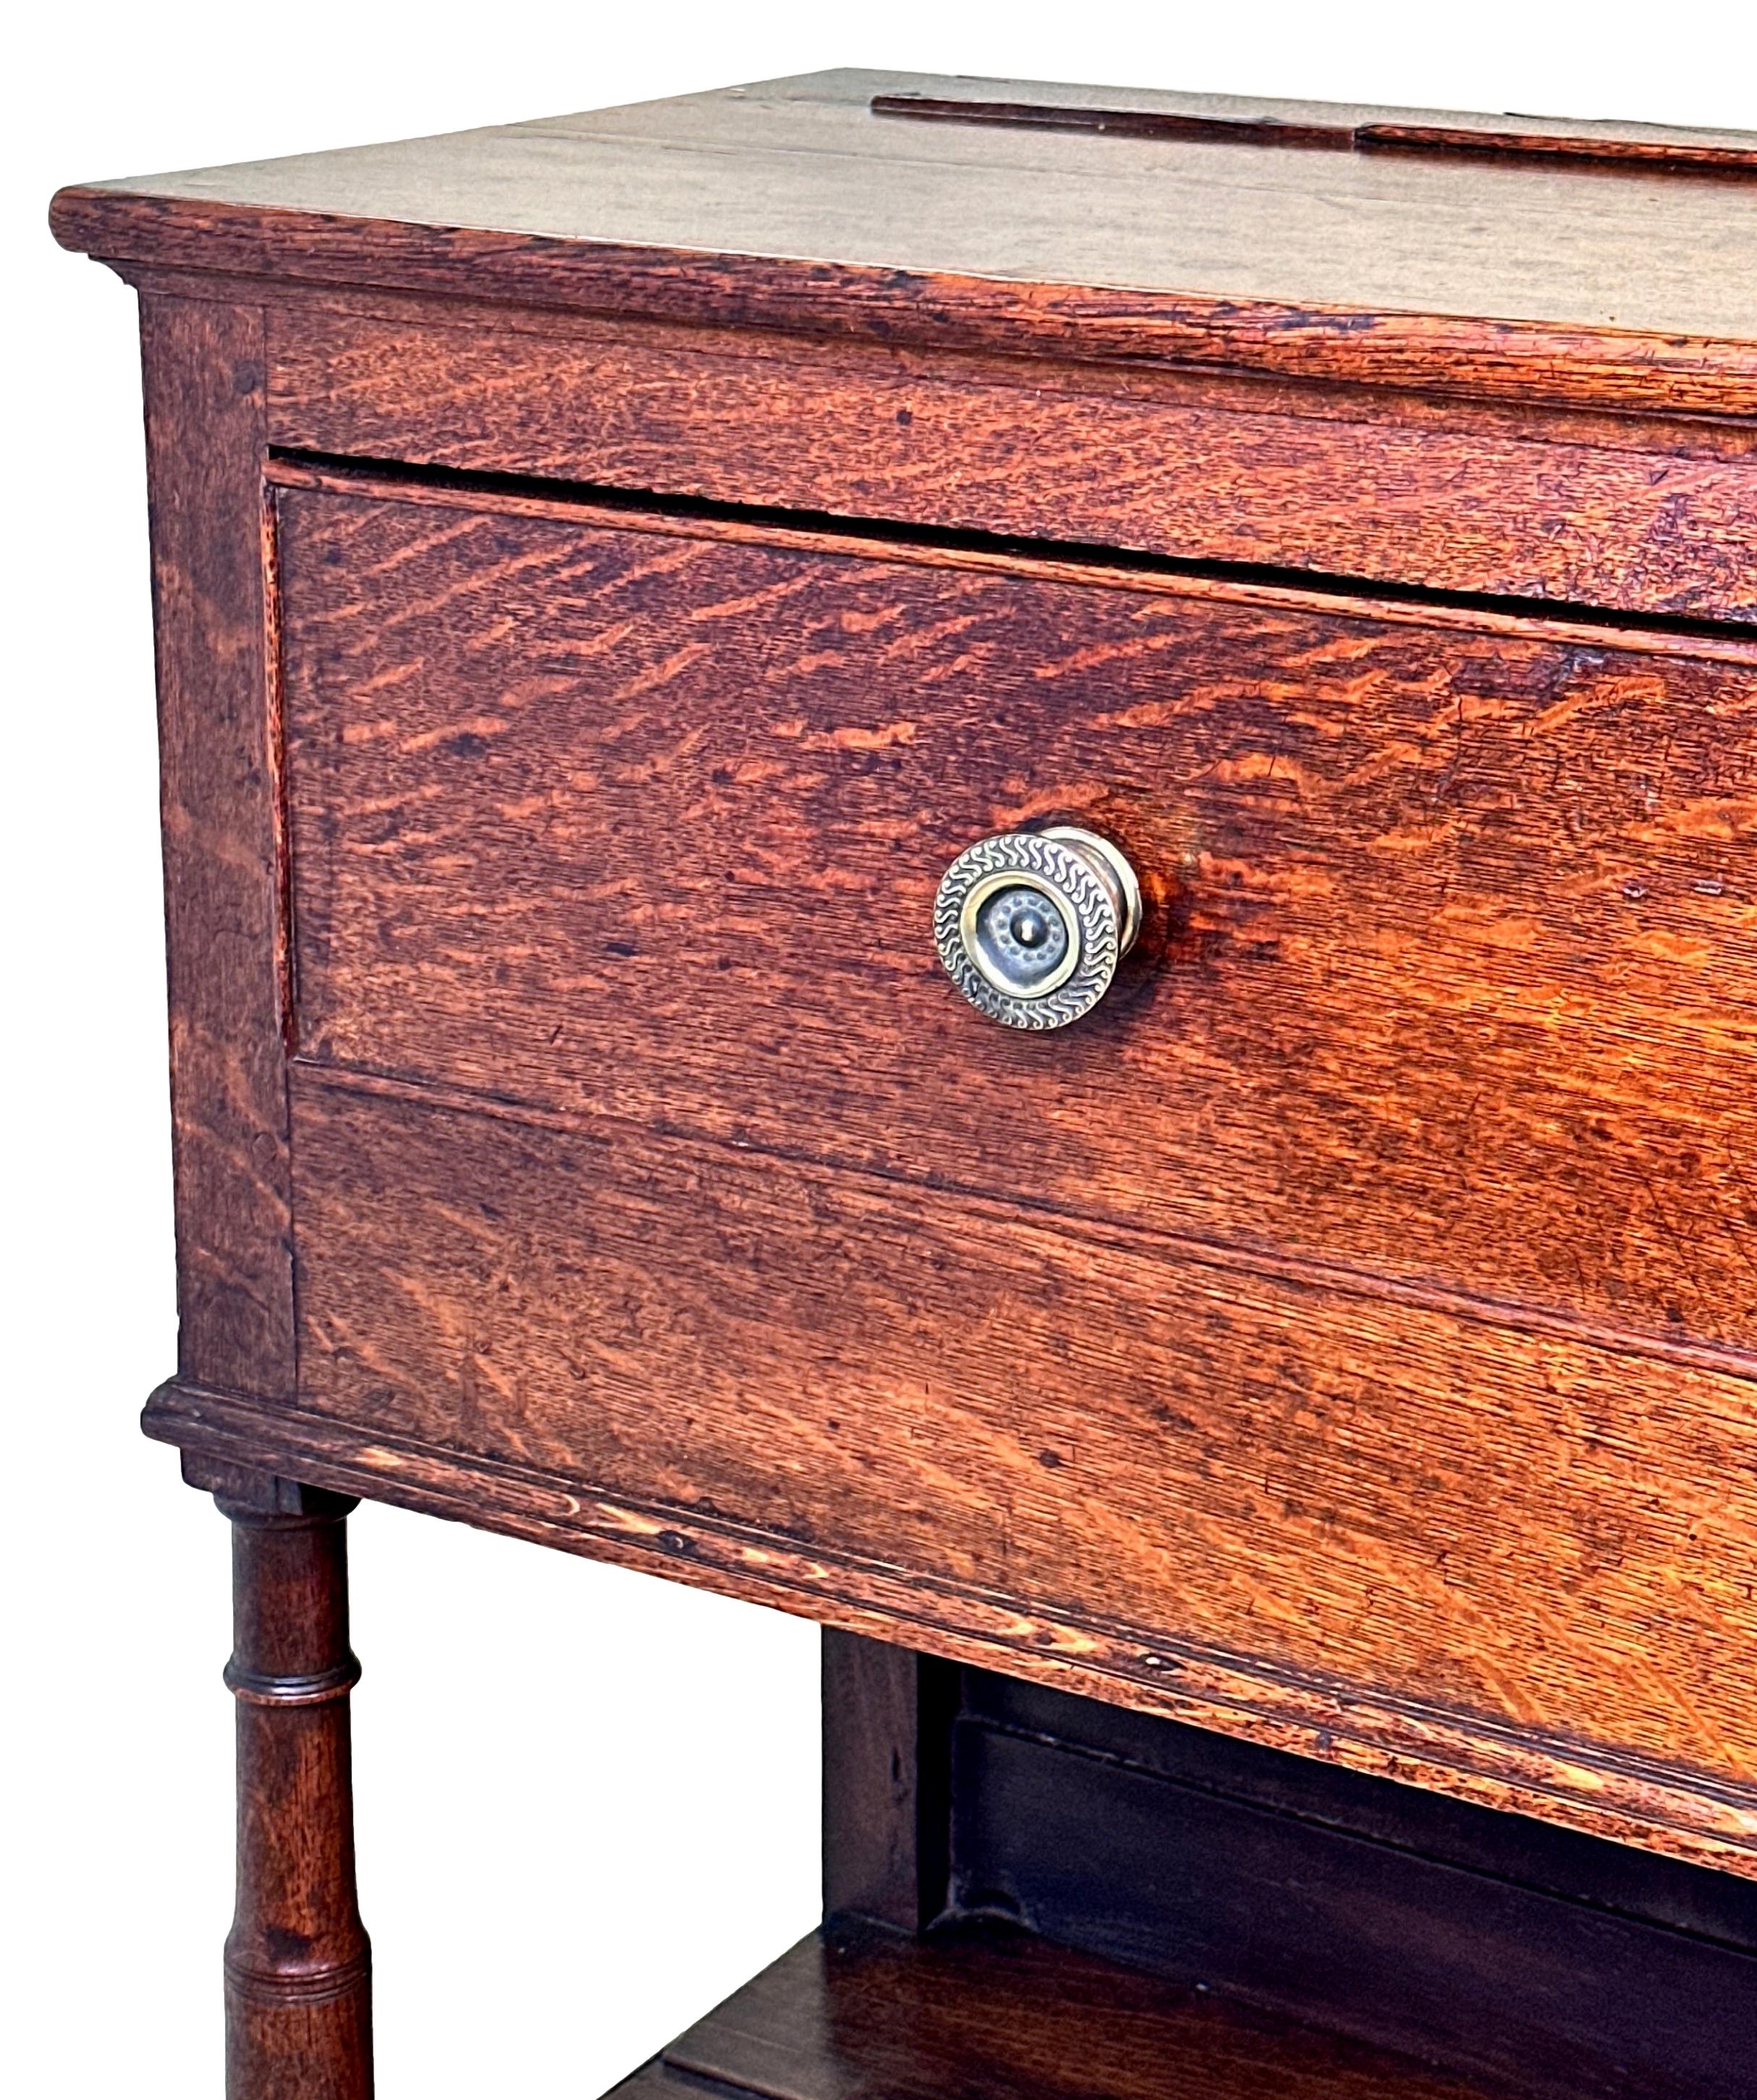 An Attractive And Very Good Quality Late 18th Century, George III Period, Oak Dresser Base Of Good Colour And Patina Throughout, Having Three Frieze Drawers With Replacement Knobs, Over Elegant Turned Upright Supports With Original Potboard Shelf